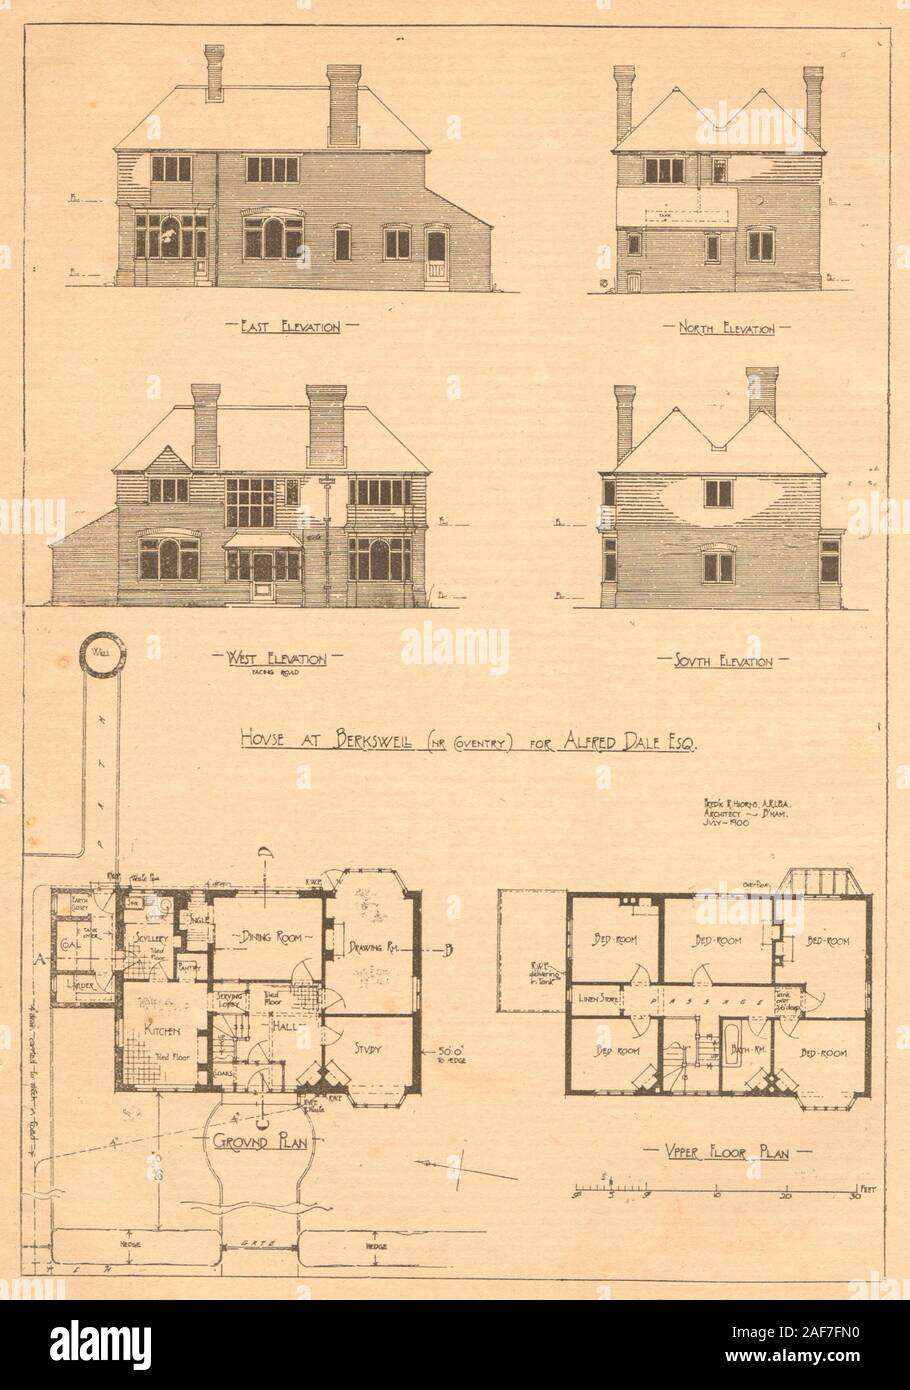 House at Berkswell, Coventry for Alfred Dale. Elevations plan. Warwickshire 1900 Stock Photo